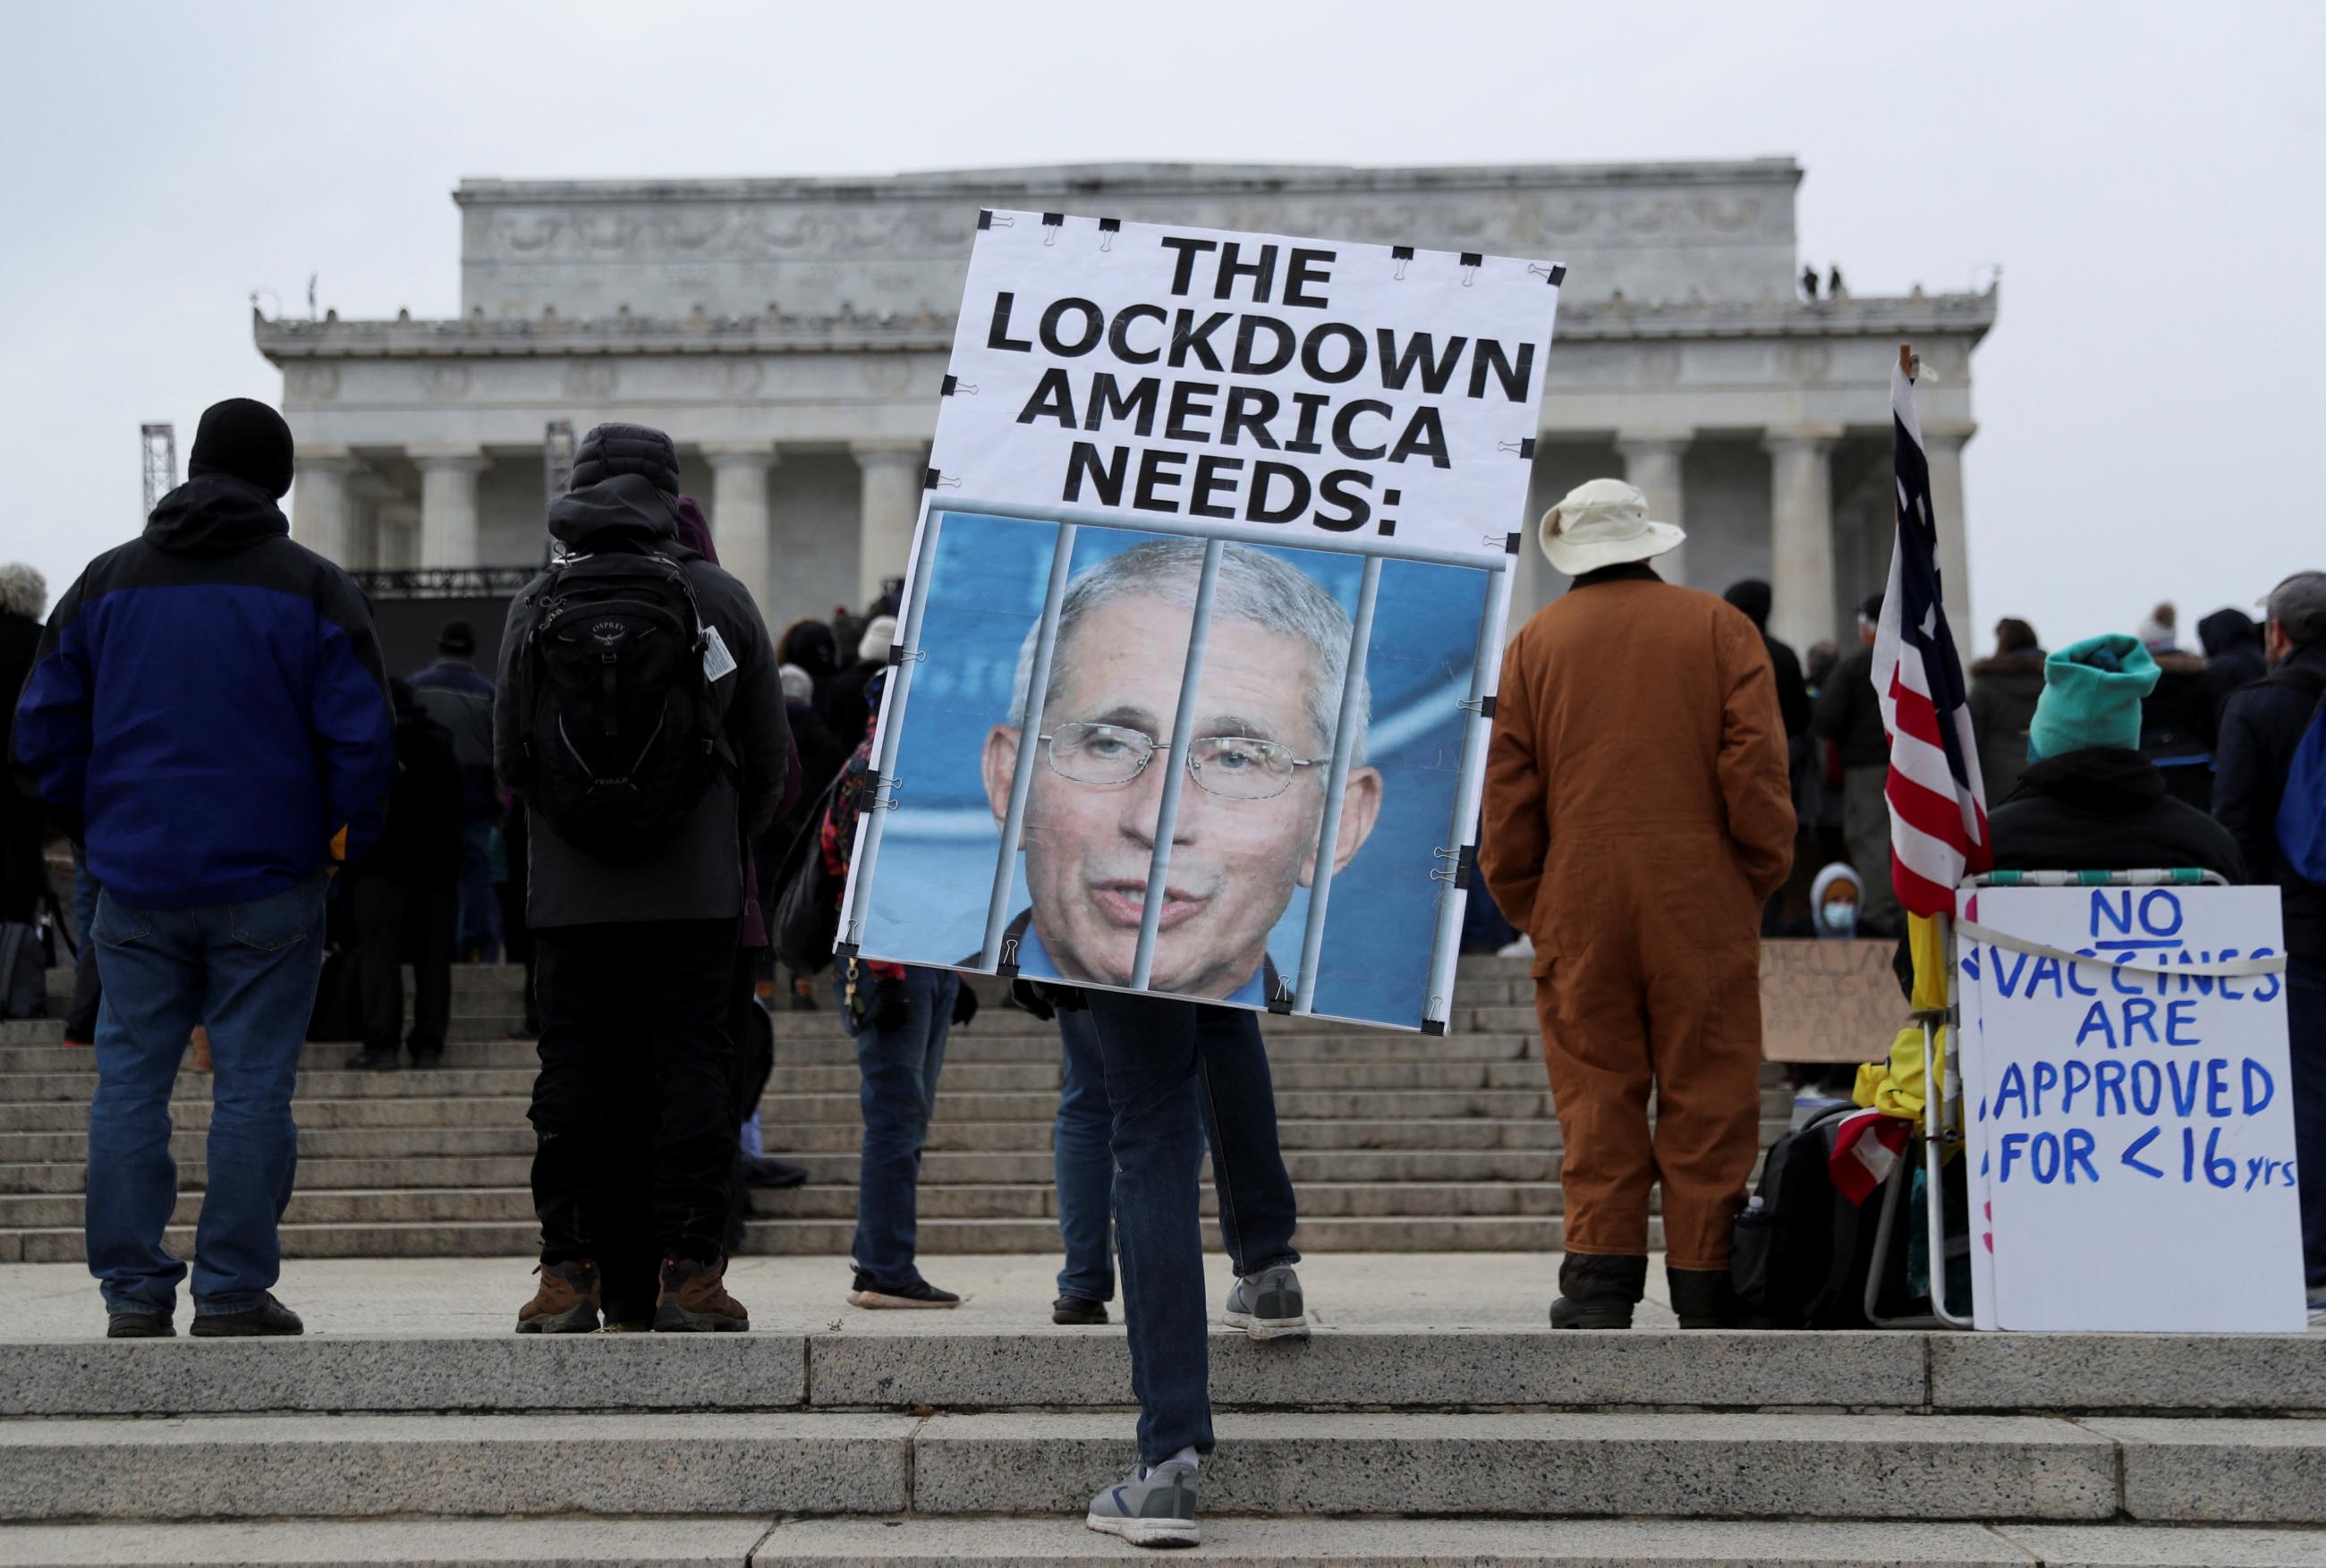 A person holds a placard outside the Lincoln Memorial during a march in opposition to coronavirus disease (COVID-19) mandates on the National Mall in Washington, D.C., U.S., January 23, 2022.